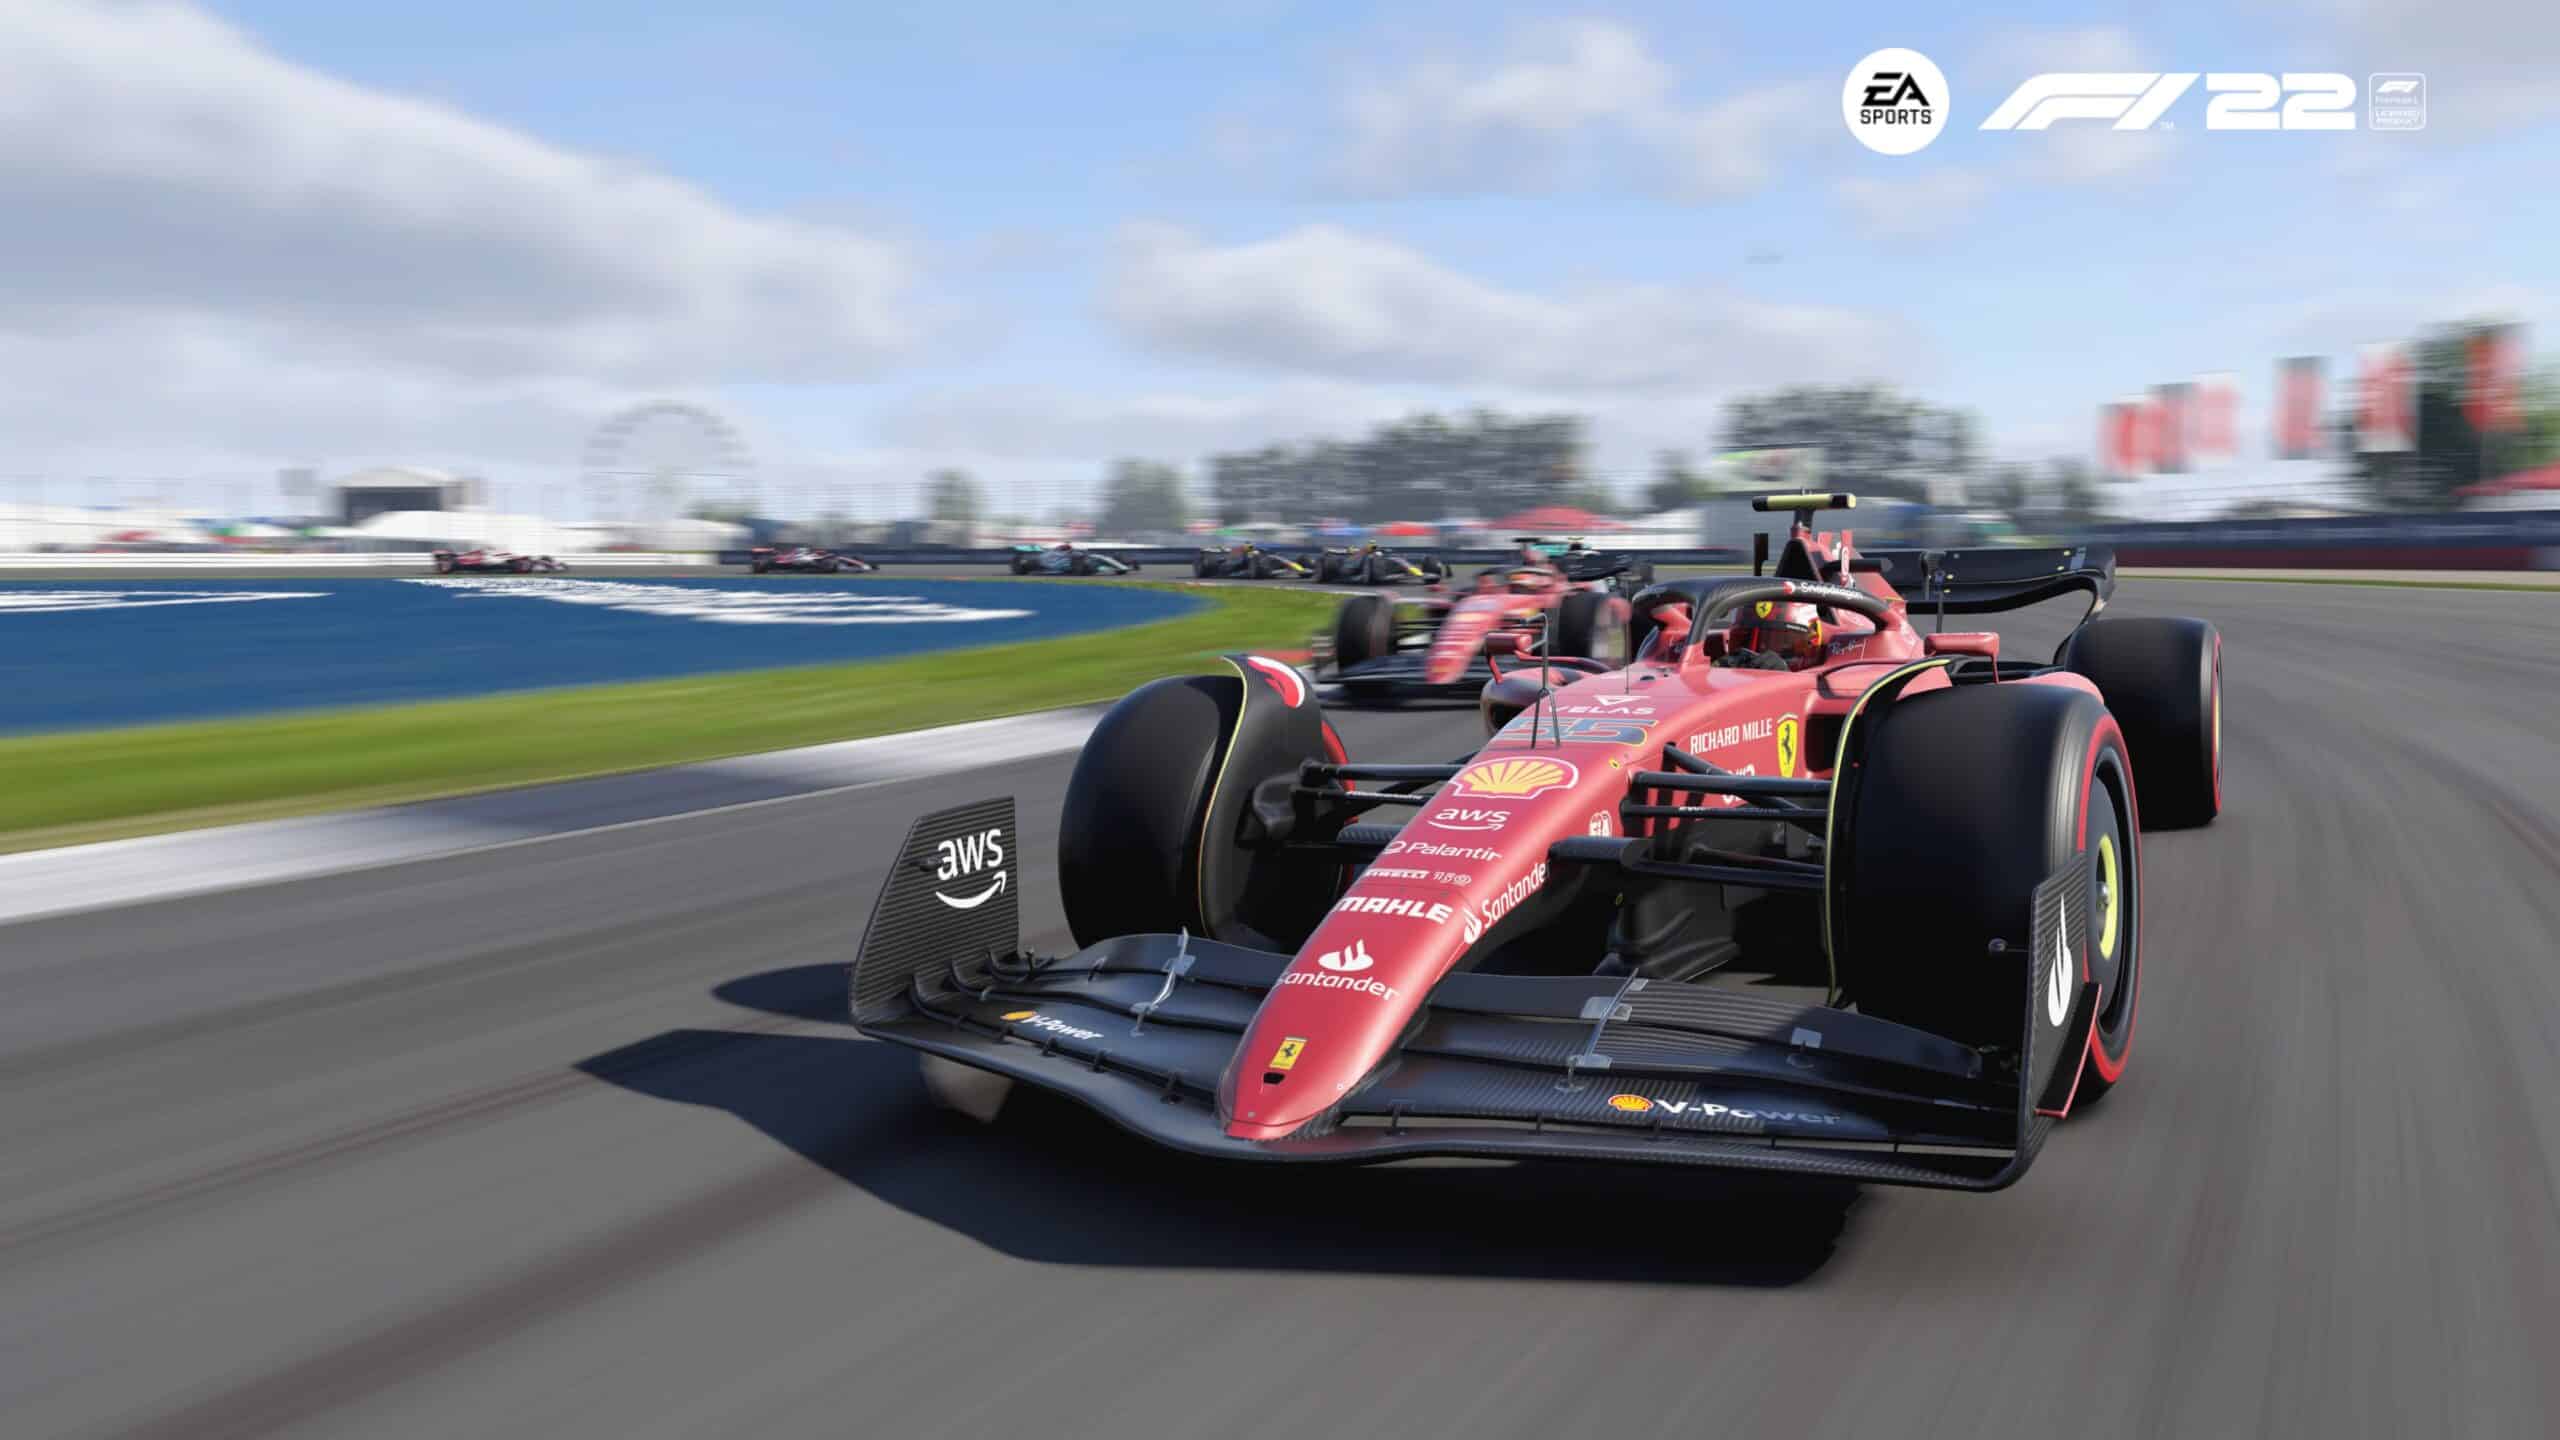 F1 22 game tops UK physical sales charts